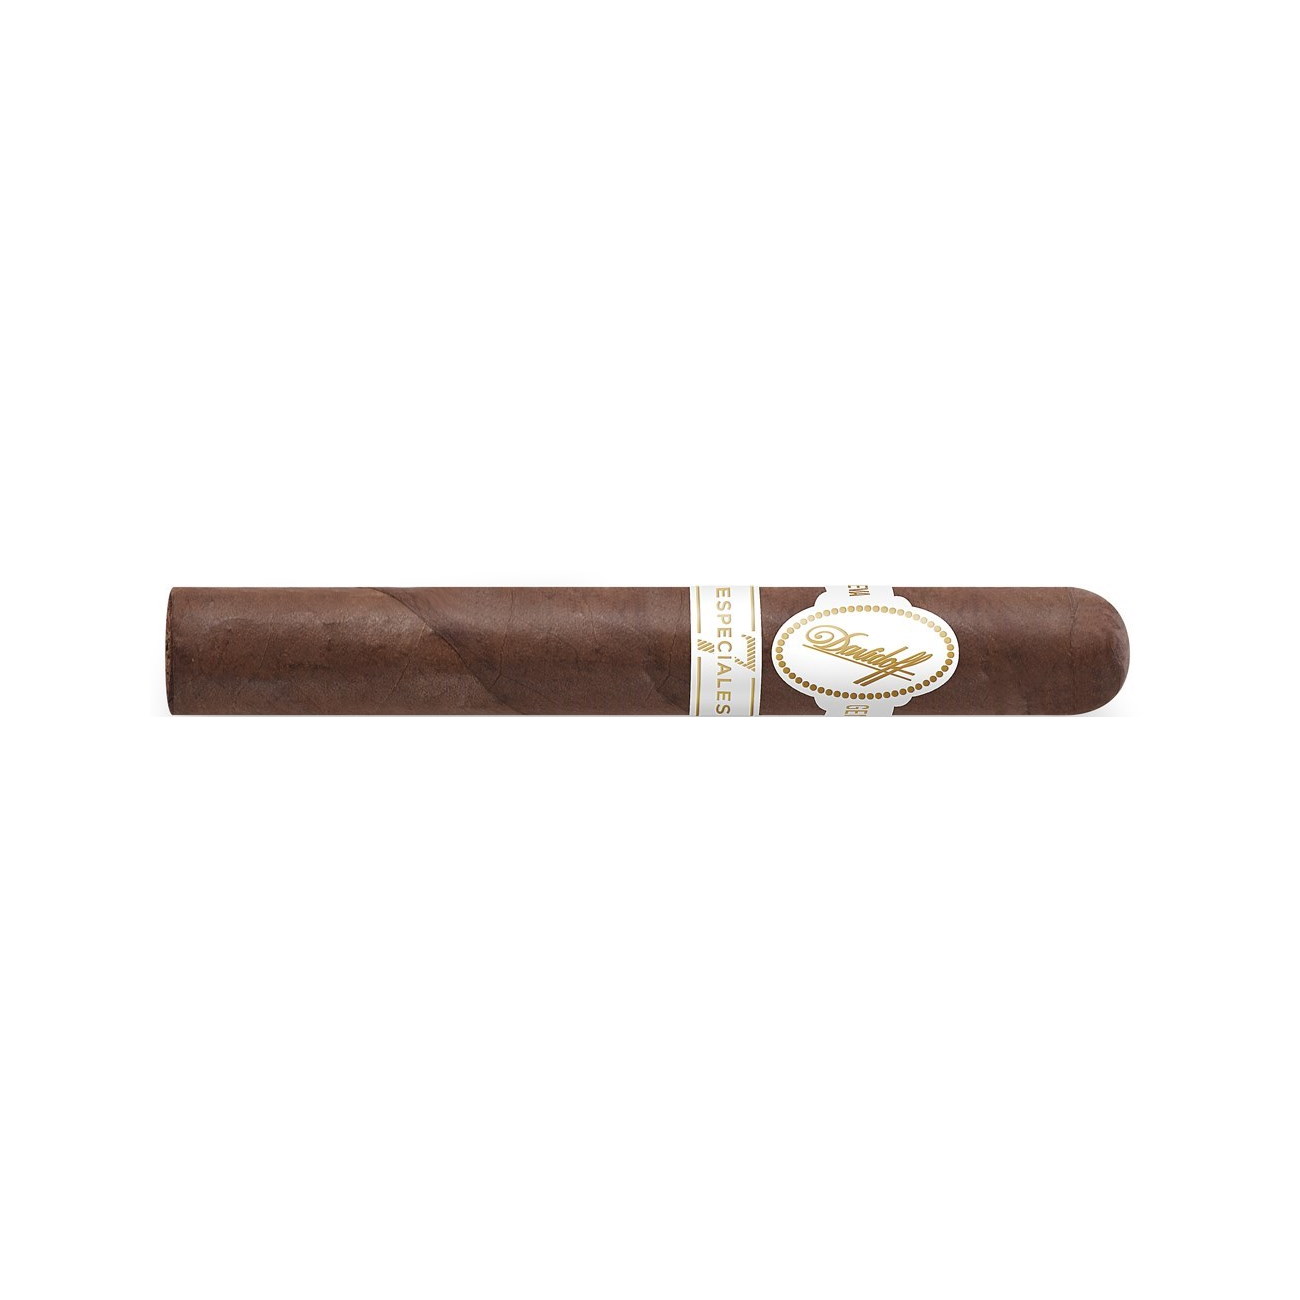 Сигара Davidoff Limited Edition 2019 Robusto Real Especiales 7